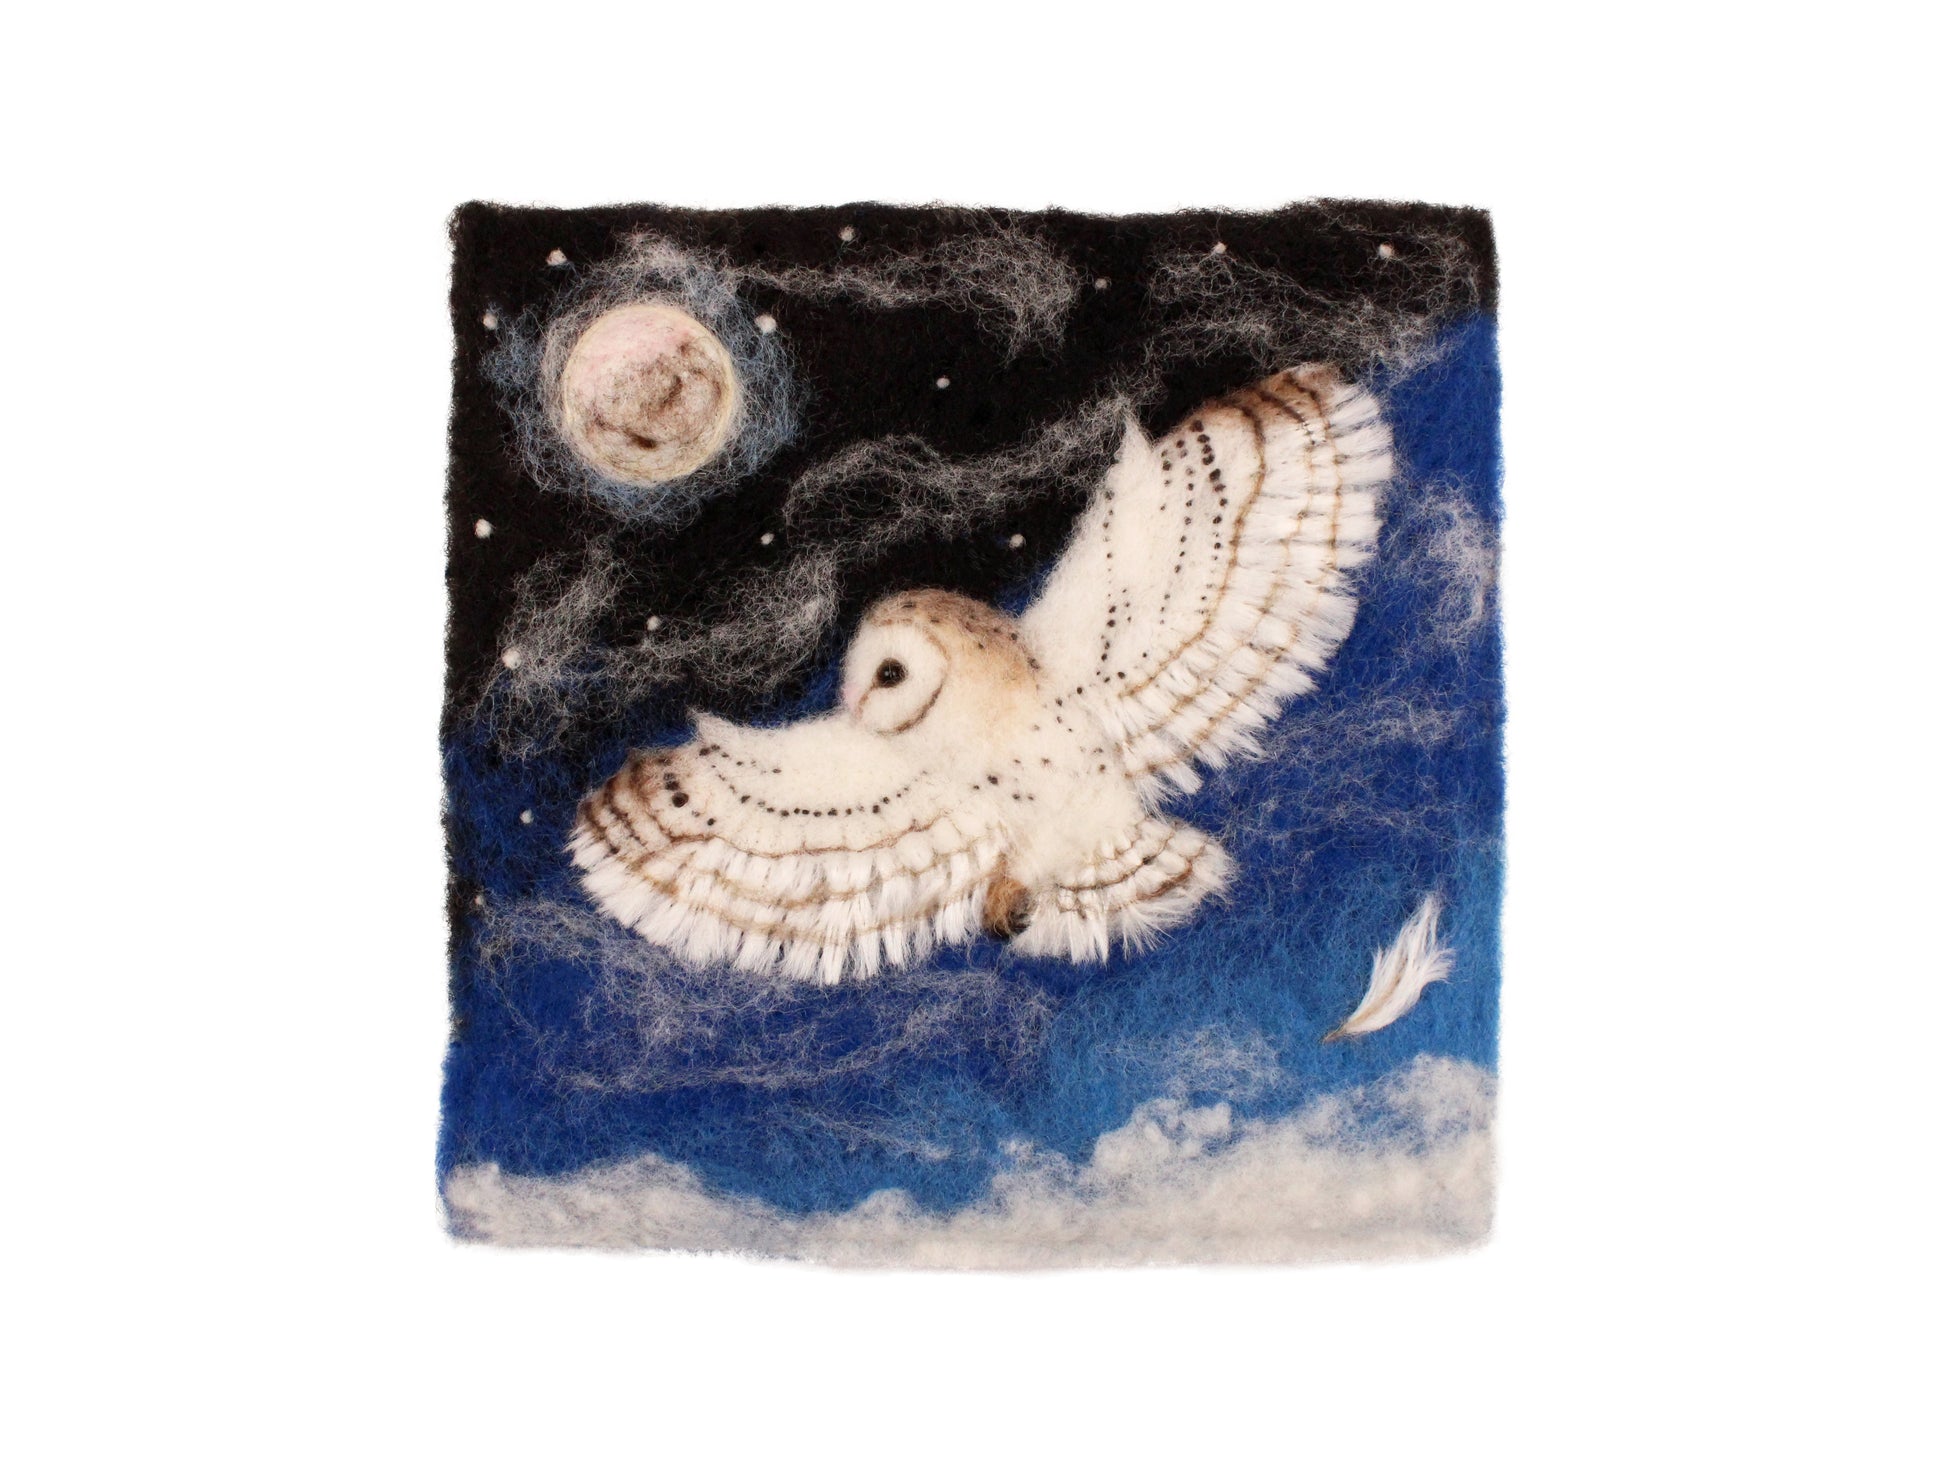 Barn Owl Picture Needle Felting Workshop with Artist Agnese Davies Thursday 8th February - The Makerss